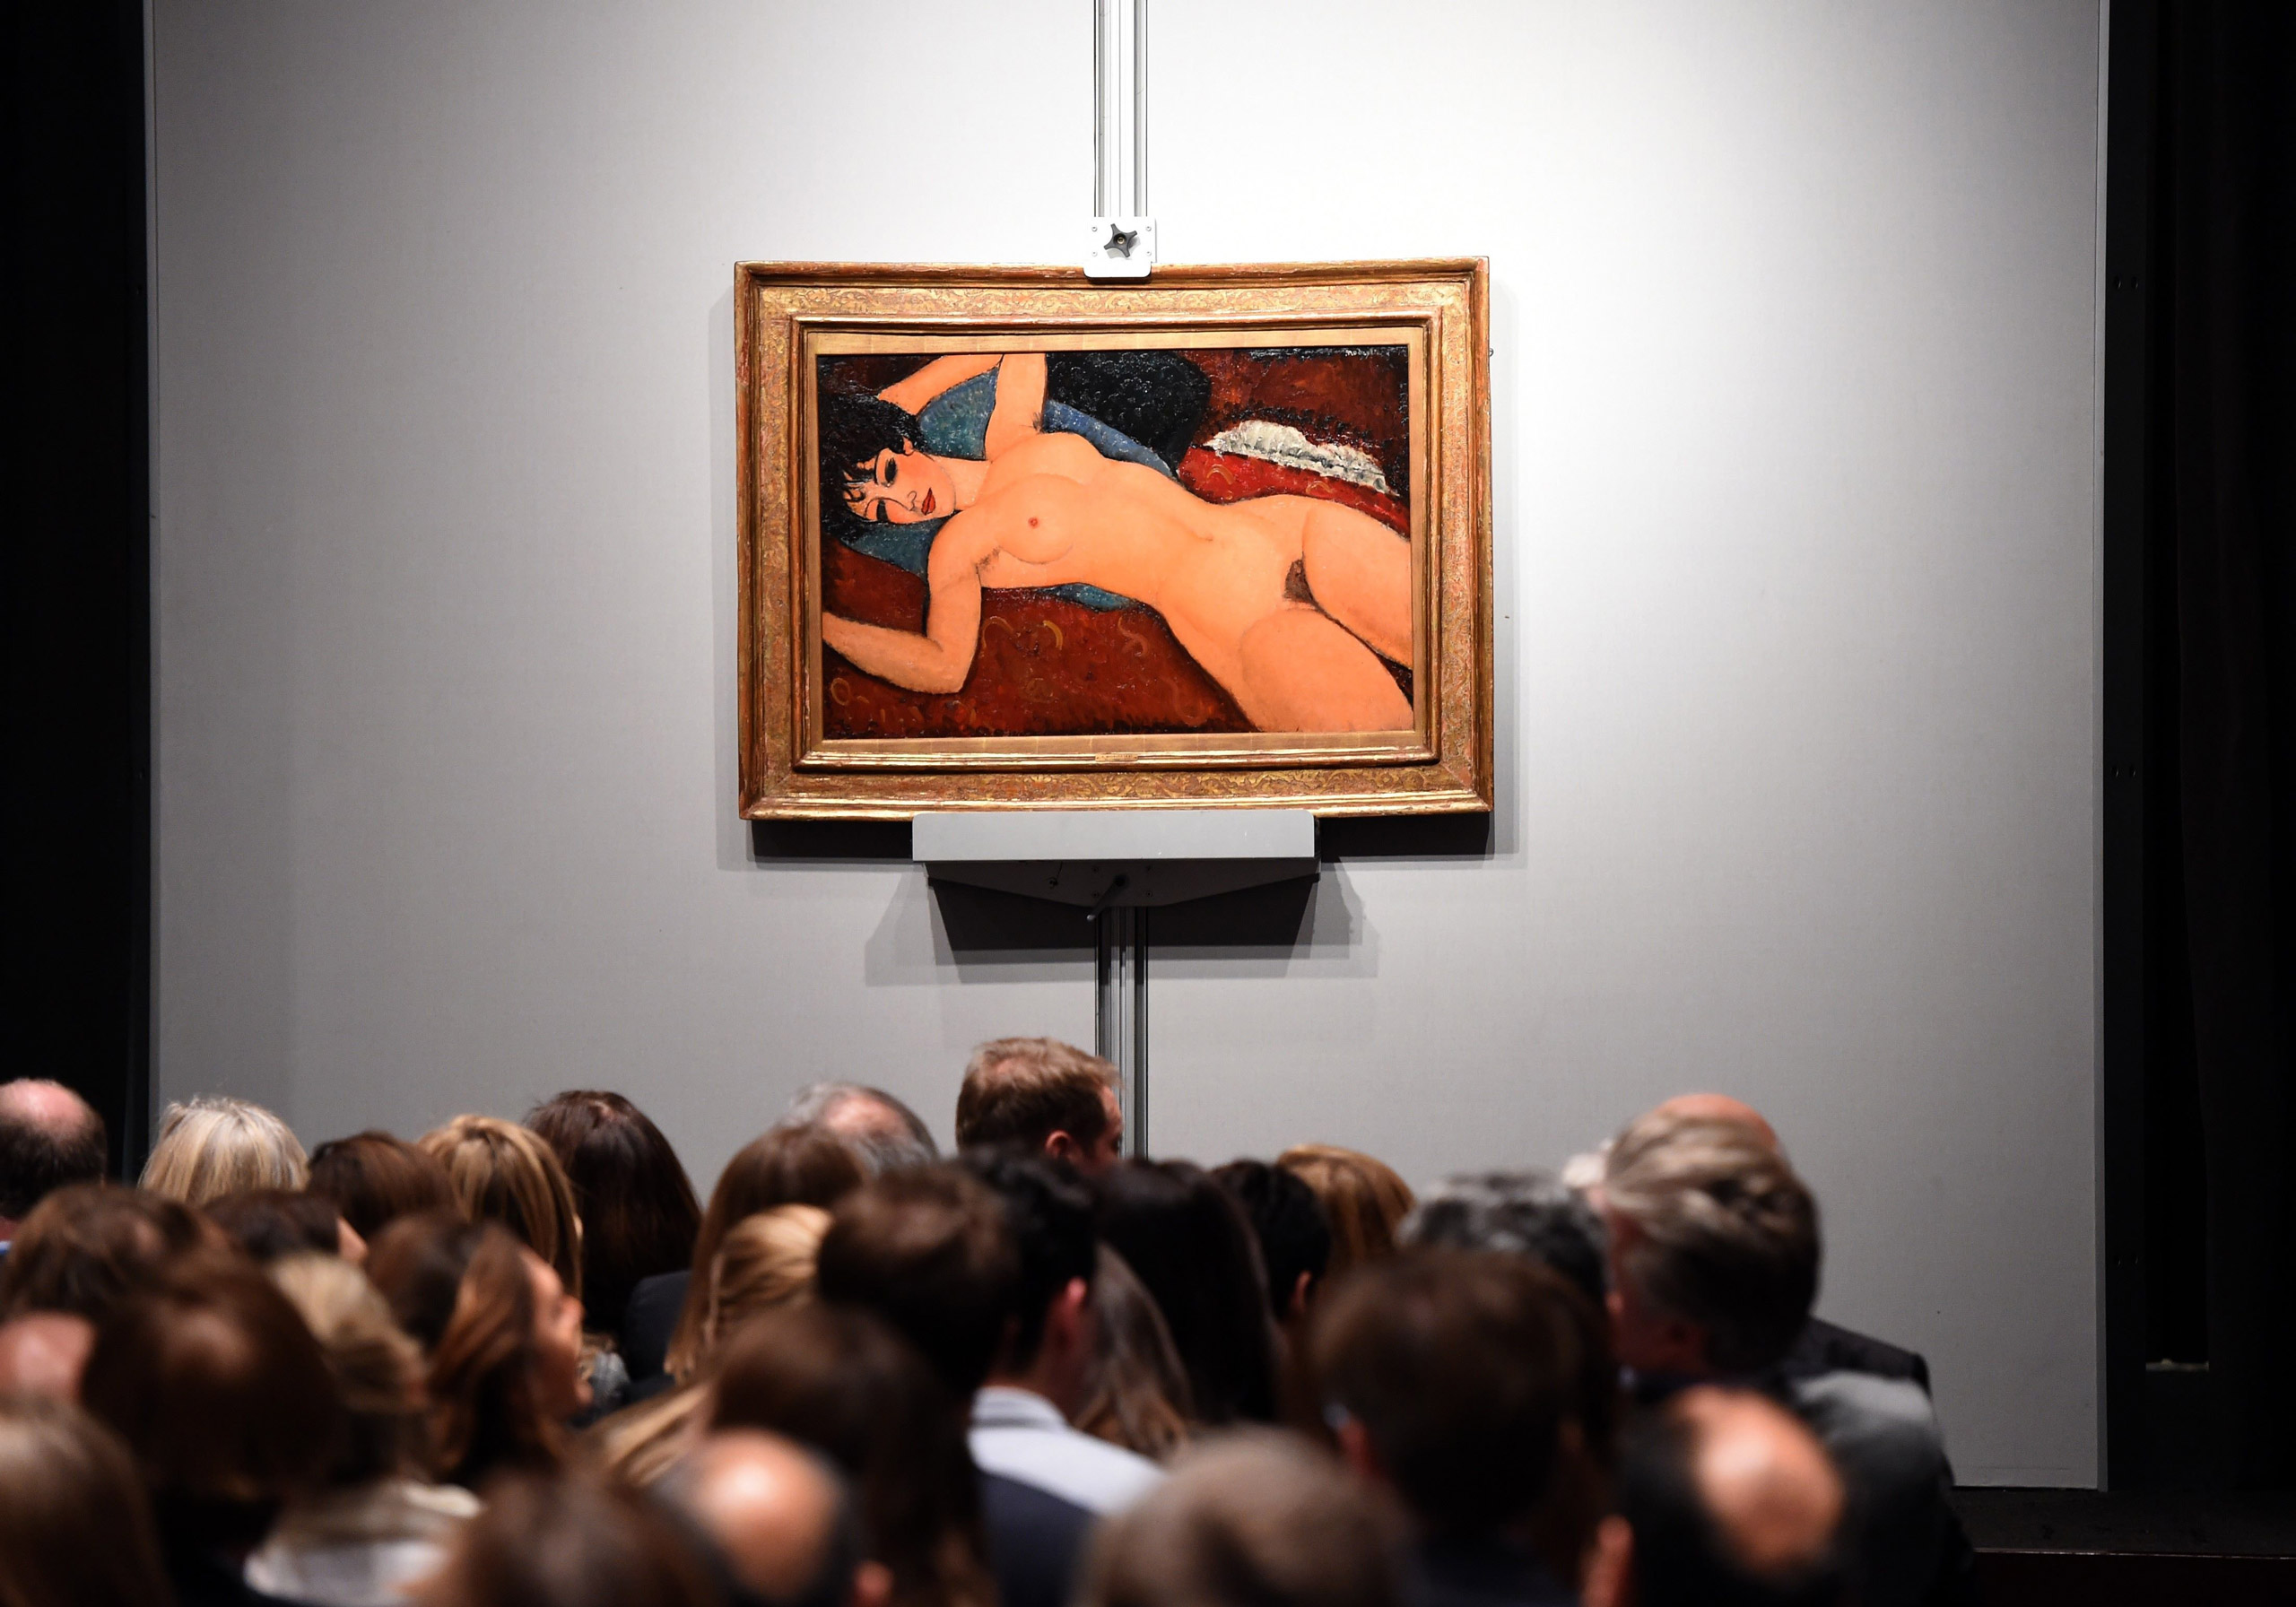 Crowds sit in front of Amedeo Modigliani's "Nu couche" during the "Artist Muse: A Curated Evening Sale" November 9, 2015 at Christie's New York  November 9, 2015.  The painting sold for USD170,405,000. AFP PHOTO / TIMOTHY A. CLARYTIMOTHY A. CLARY/AFP/Getty Images